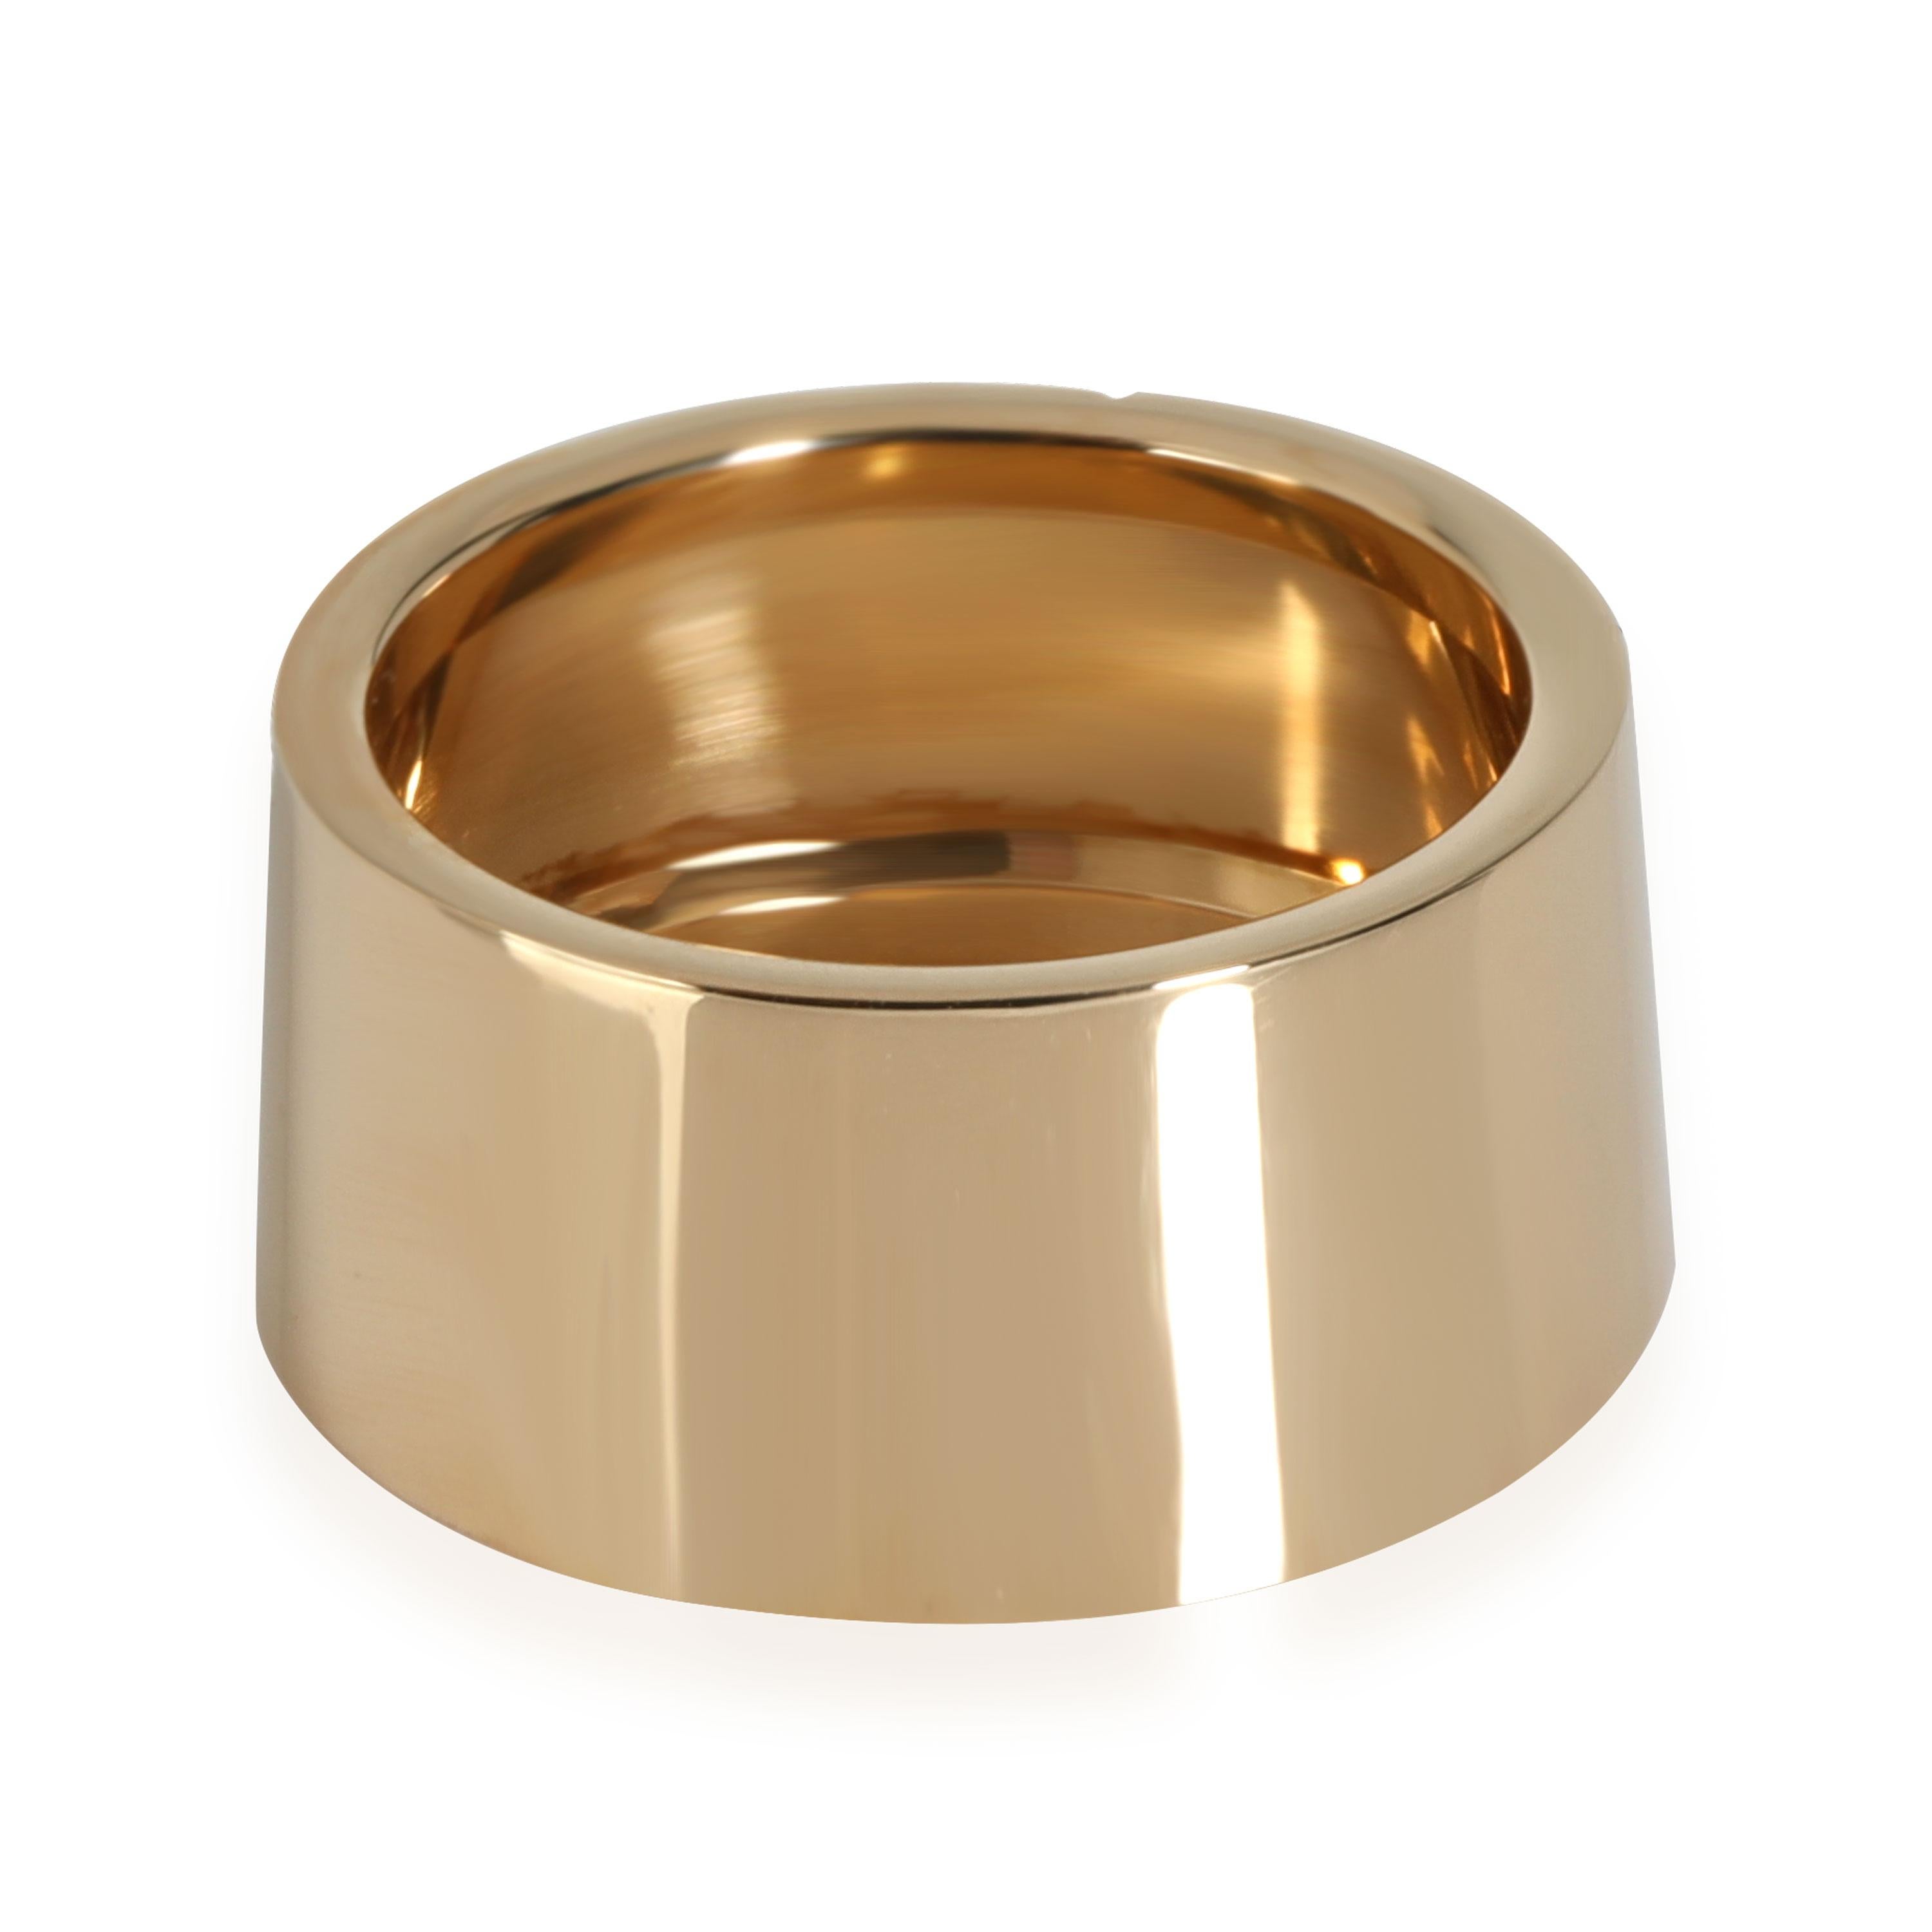 Cartier High LOVE Ring in 18k Yellow Gold

PRIMARY DETAILS
SKU: 116271
Listing Title: Cartier High LOVE Ring in 18k Yellow Gold
Condition Description: Retails for 3600 USD. In excellent condition and recently polished. The ring size is 6.0. Cartier